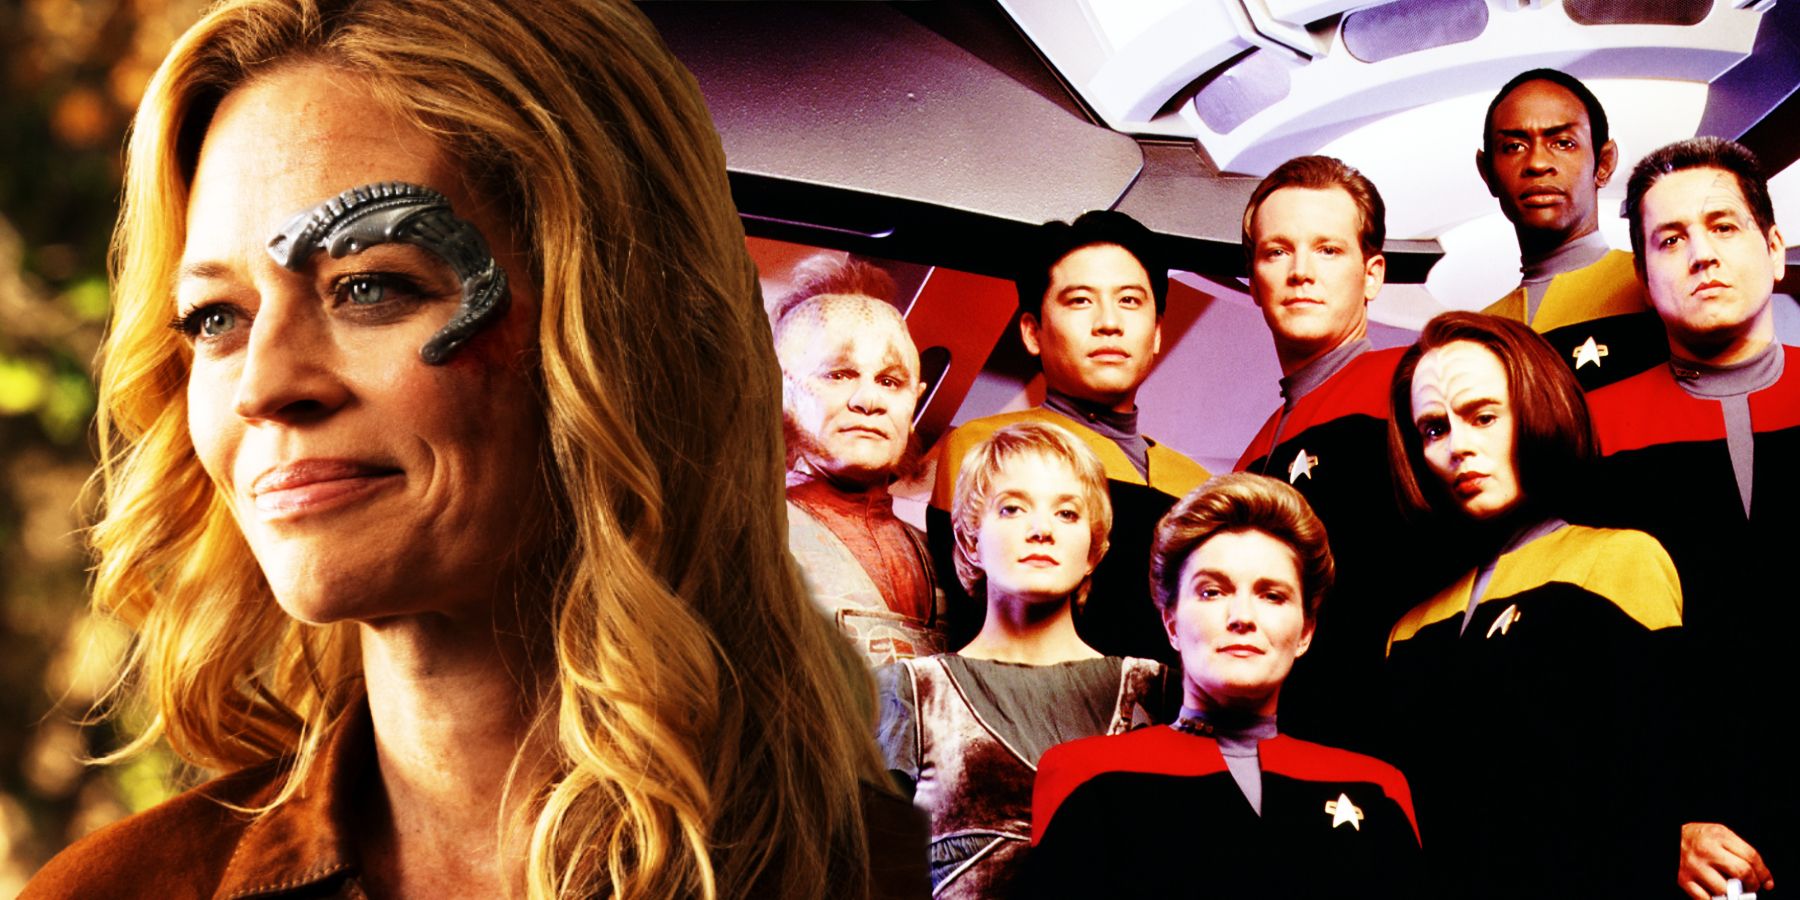 Jeri Ryan as Seven of Nine and the Star Trek Voyager cast